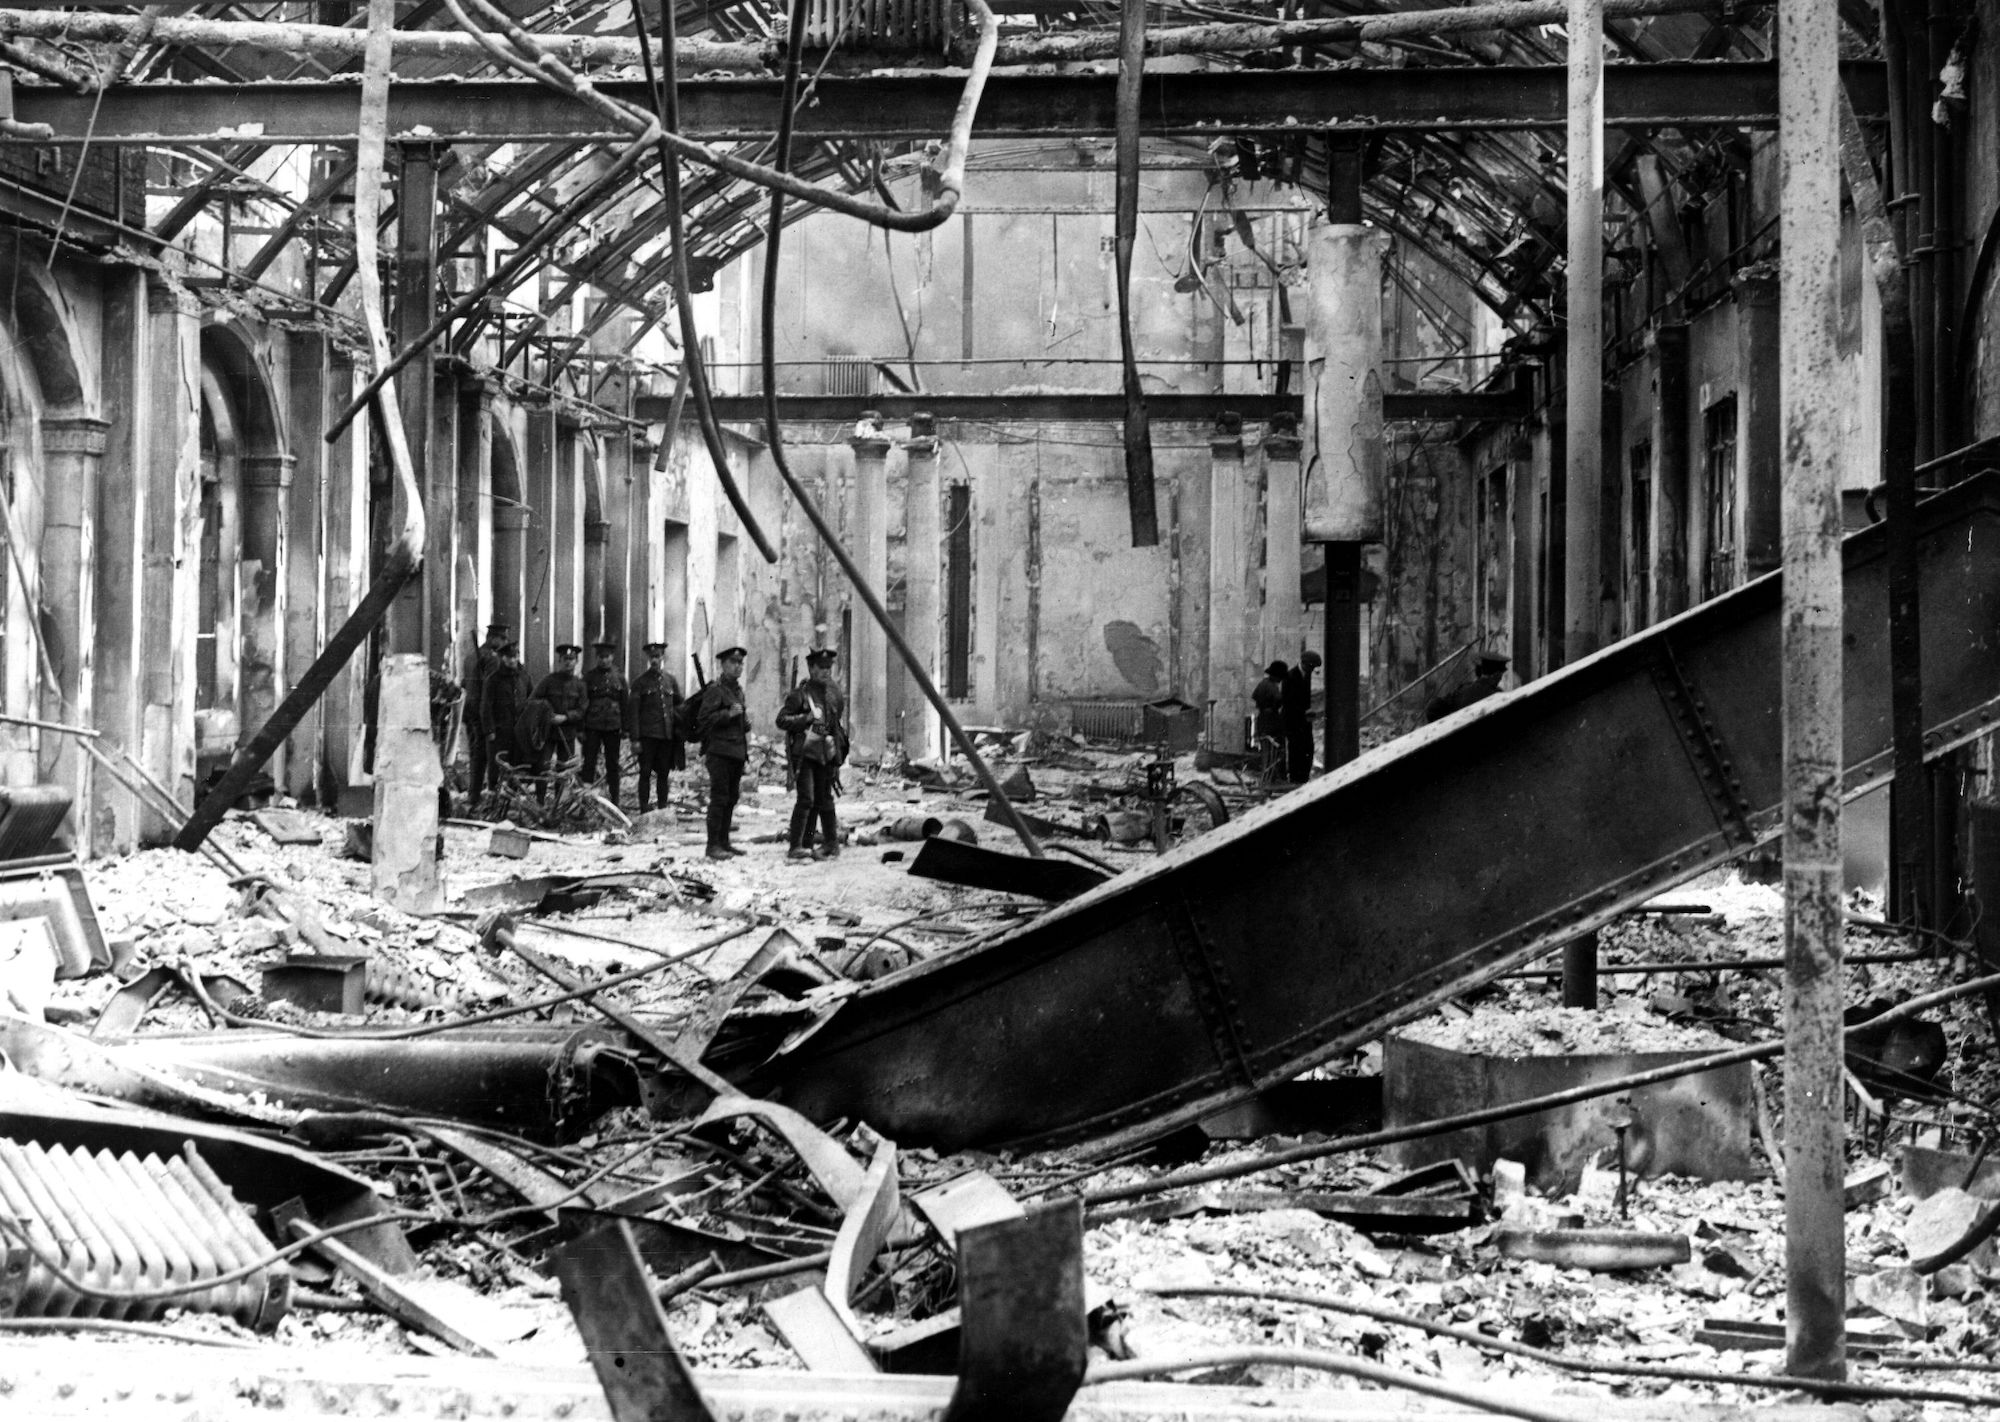 1916: Soldiers survey the interior of the completely wrecked Post Office in Sackville Street, Dublin, during the Easter Rising of 1916. (Photo by Hulton Archive/Getty Images)